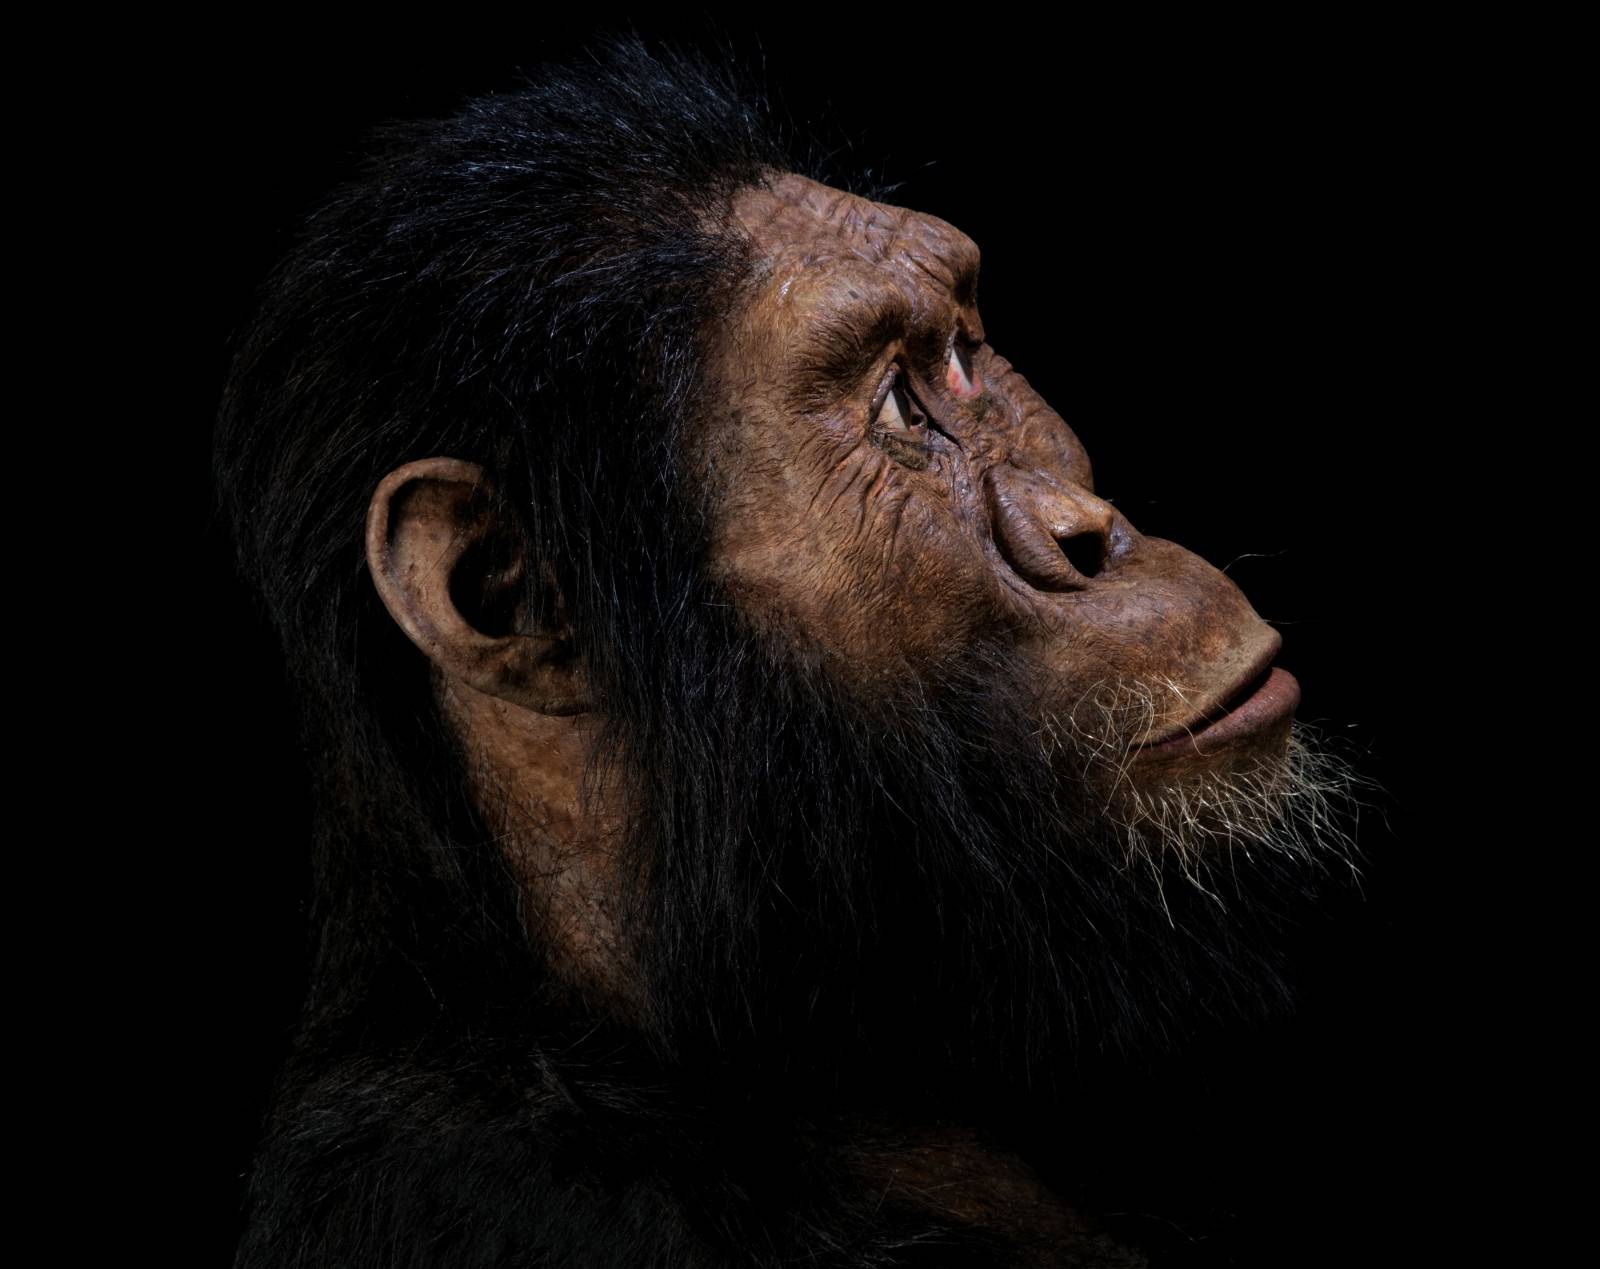 Handout photo of a facial reconstruction by John Gurche of the species Australopithecus anamensis, based on a nearly complete cranium fossil discovered in 2016 in Ethiopia